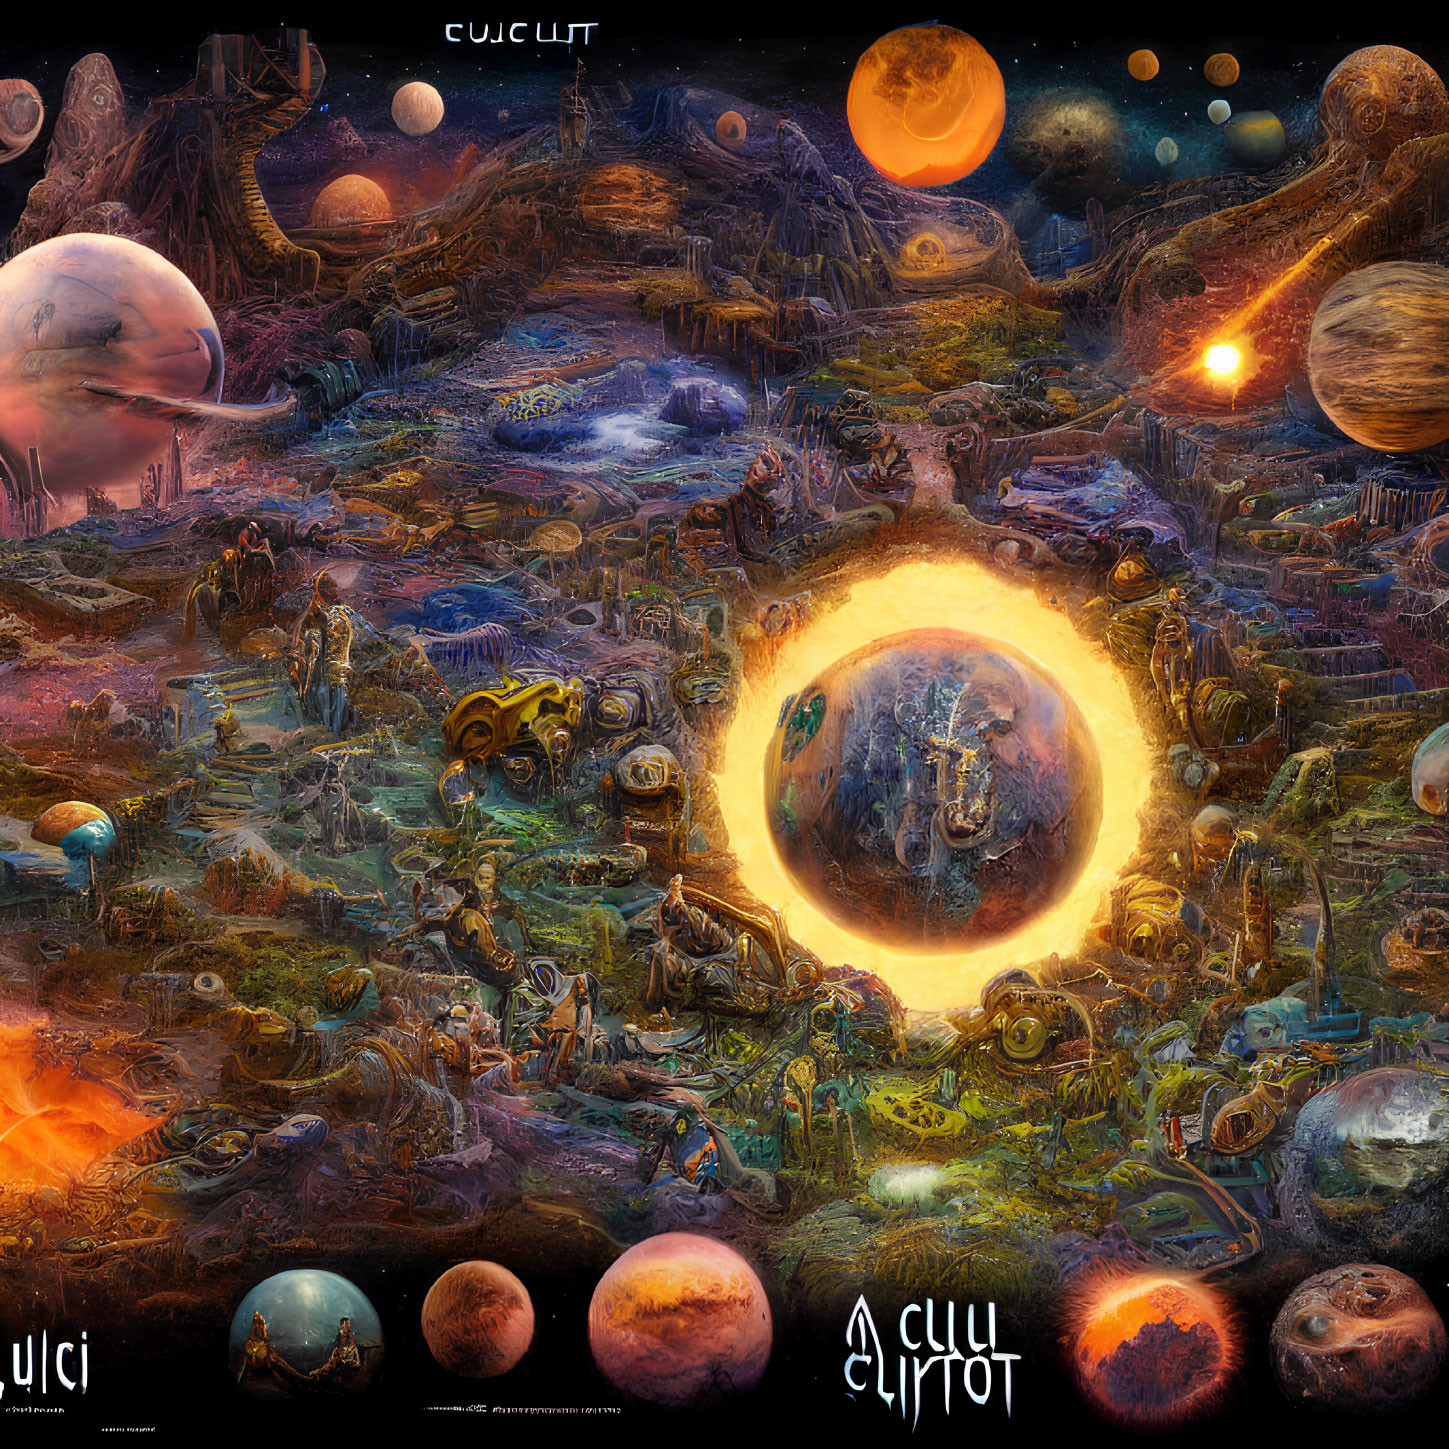 Vivid chaotic cosmic landscape with planets, suns, and glowing portal